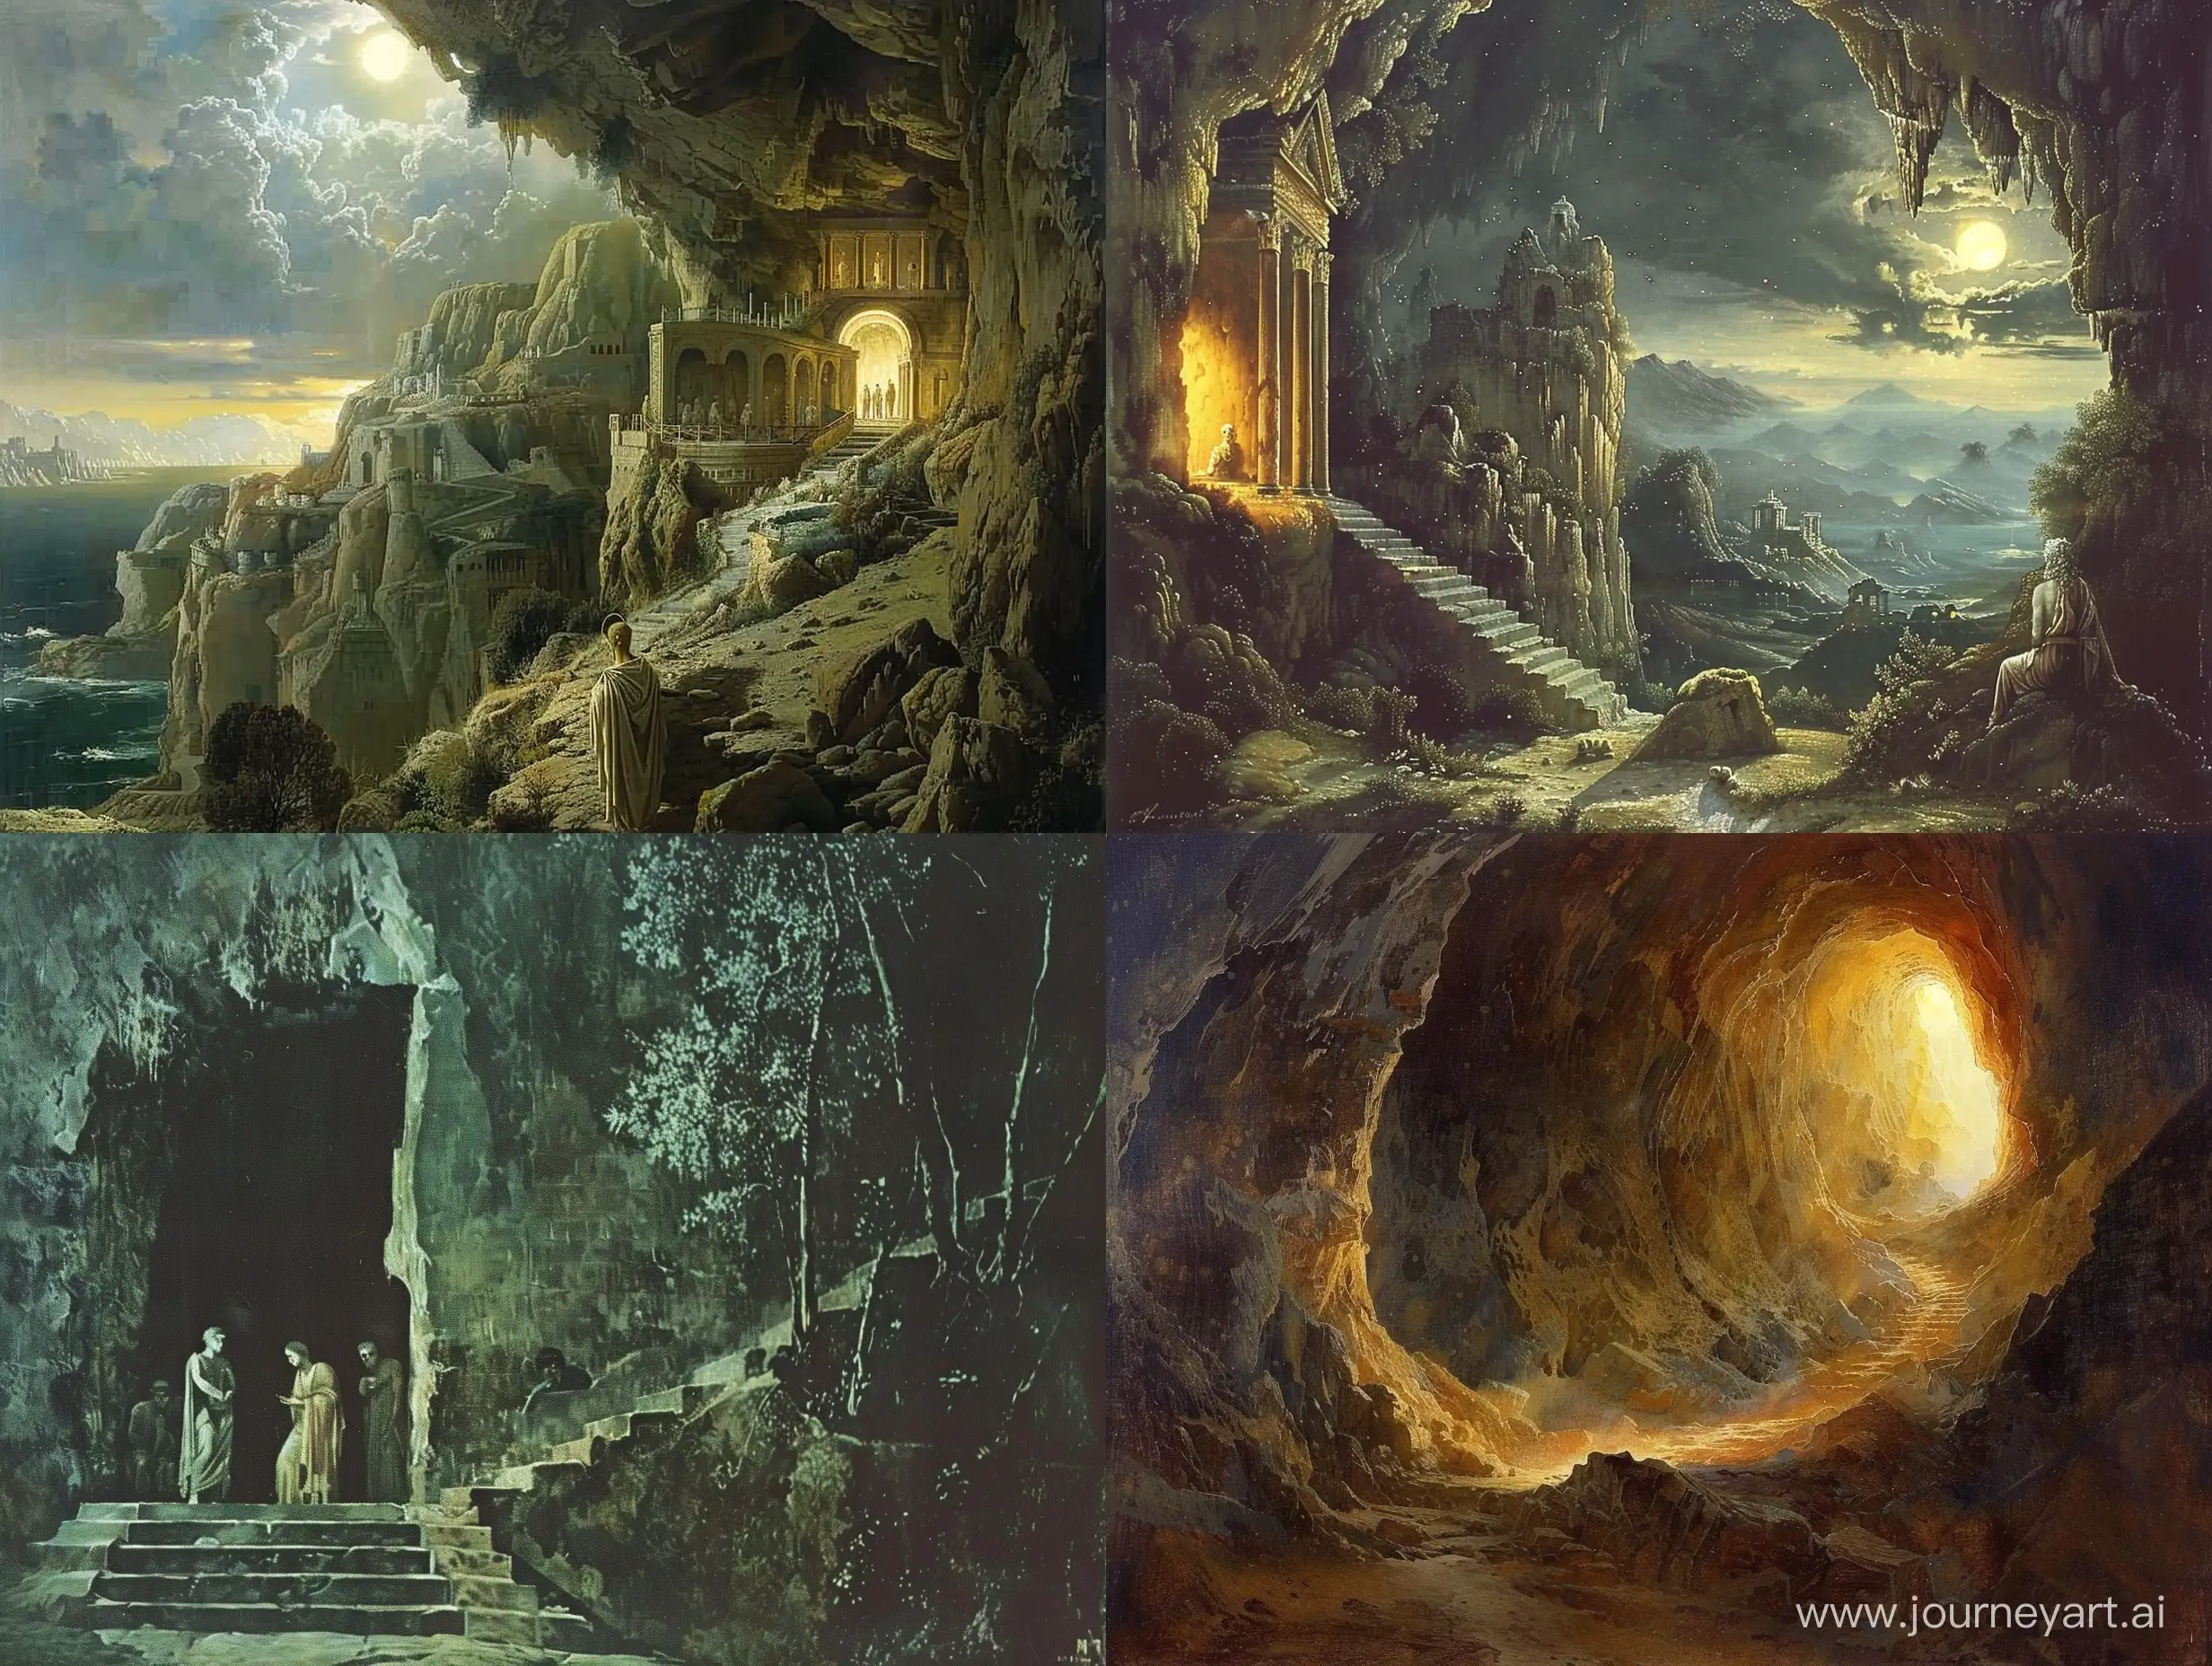 Platos-Cave-Philosophical-Allegory-Illustration